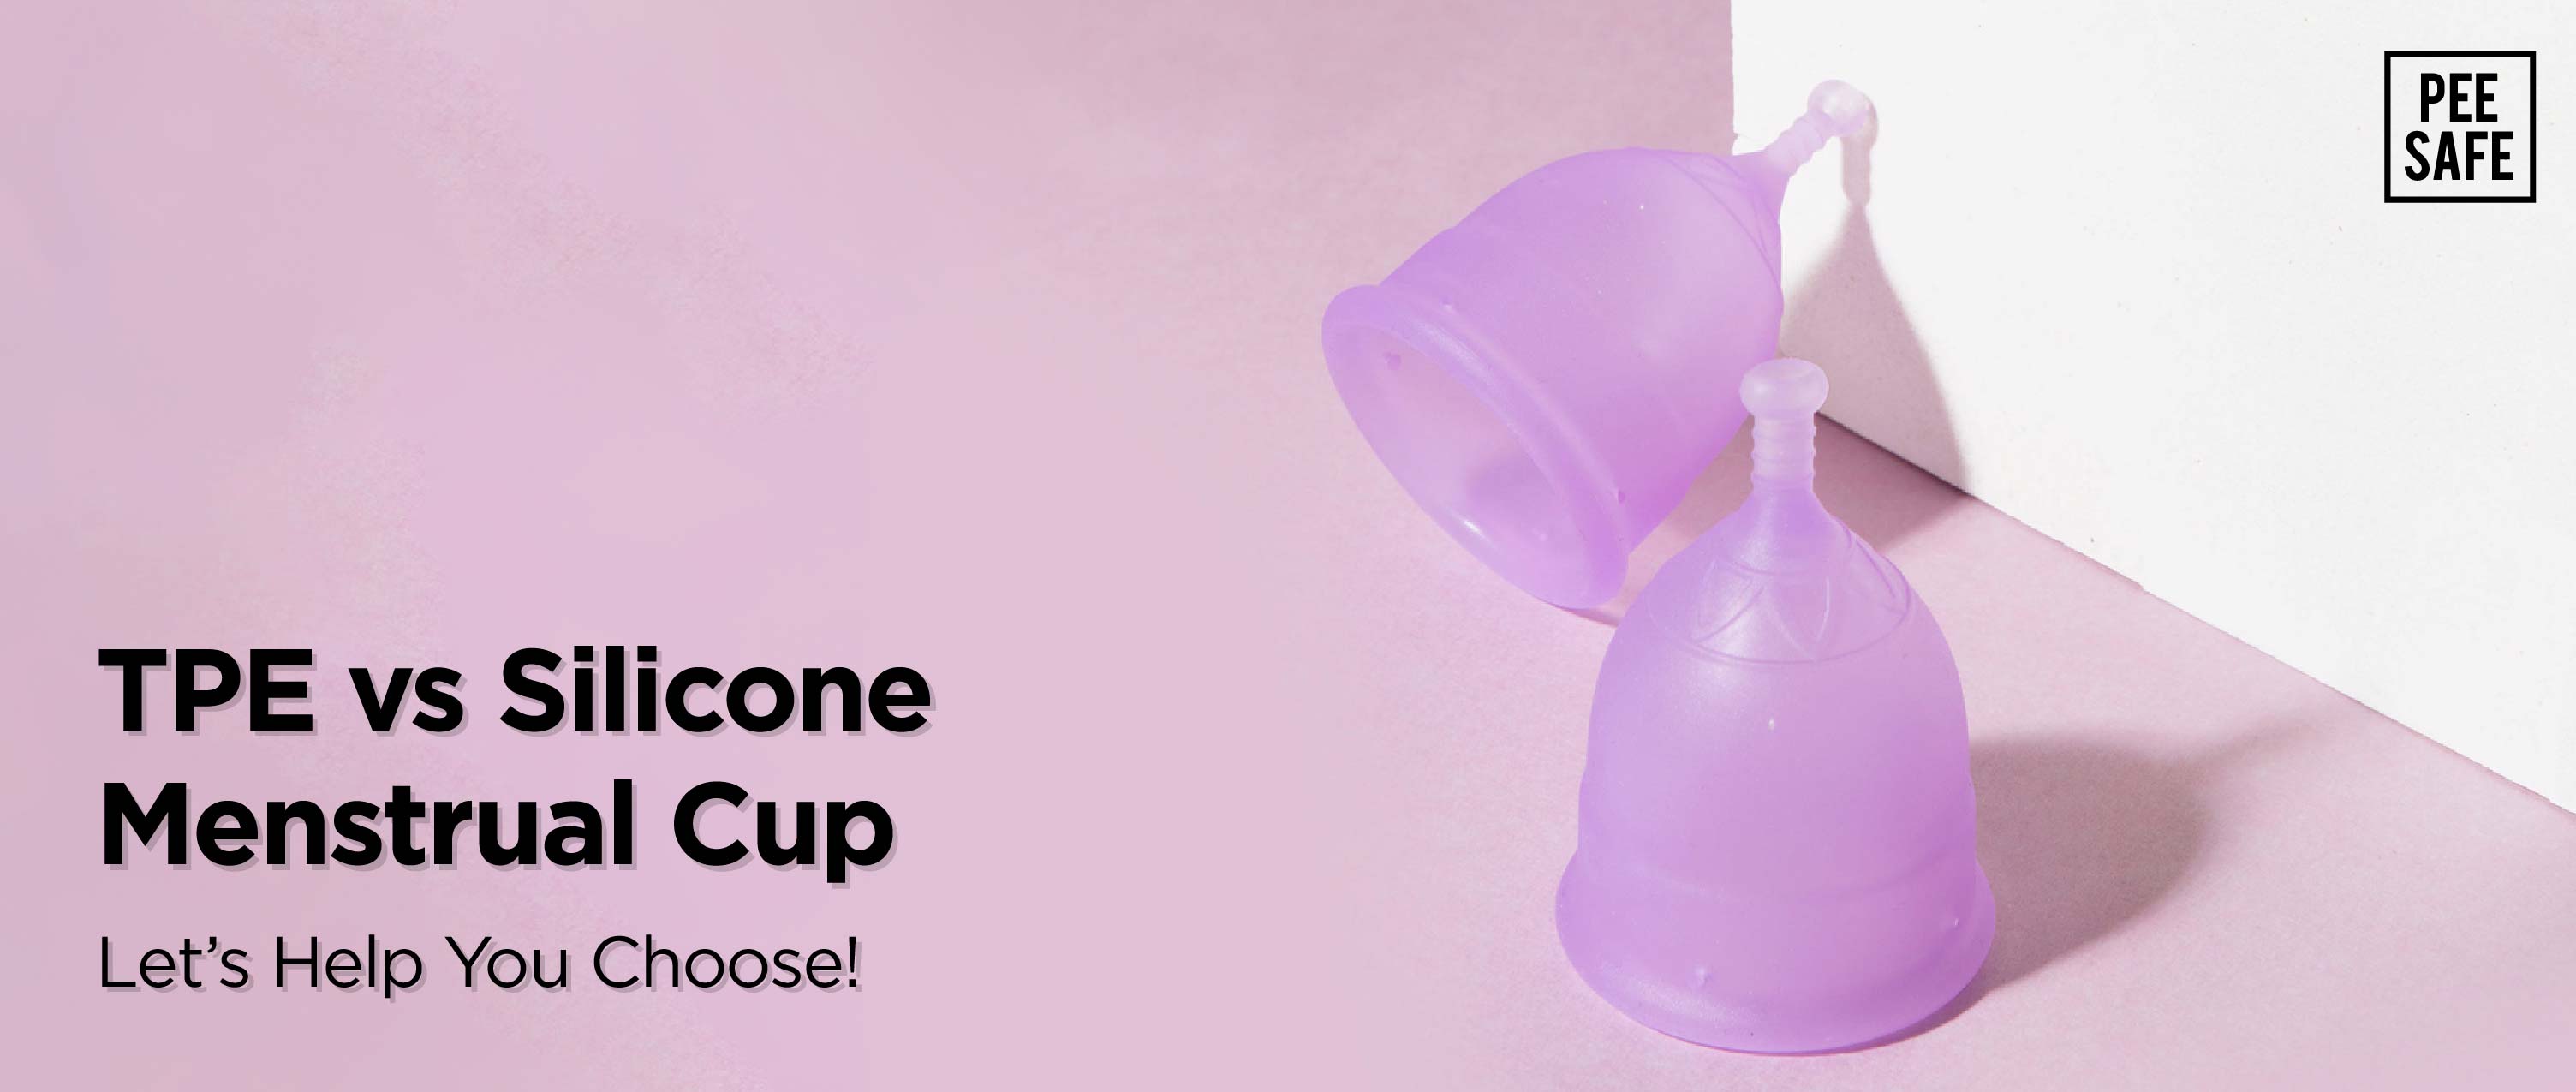 TPE vs Silicone Menstrual Cup: Let’s Help You Choose!